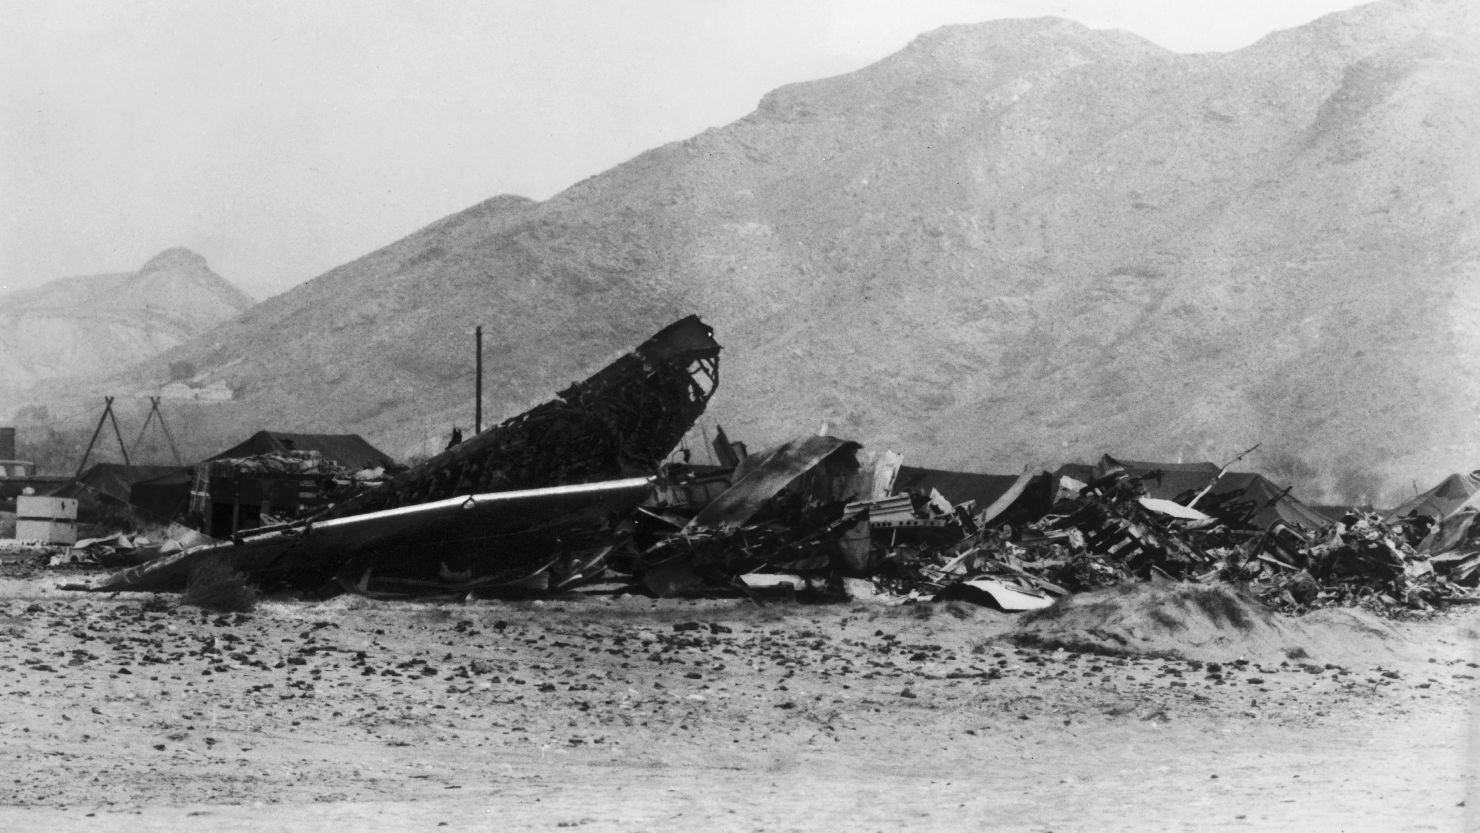 The 1966 disaster at Palomares, Spain, was caused by the midair collision of a U.S. B-52 and a KC-135 refueling plane. The B-52 dropped its payload of four nuclear weapons, two of which released plutonium.